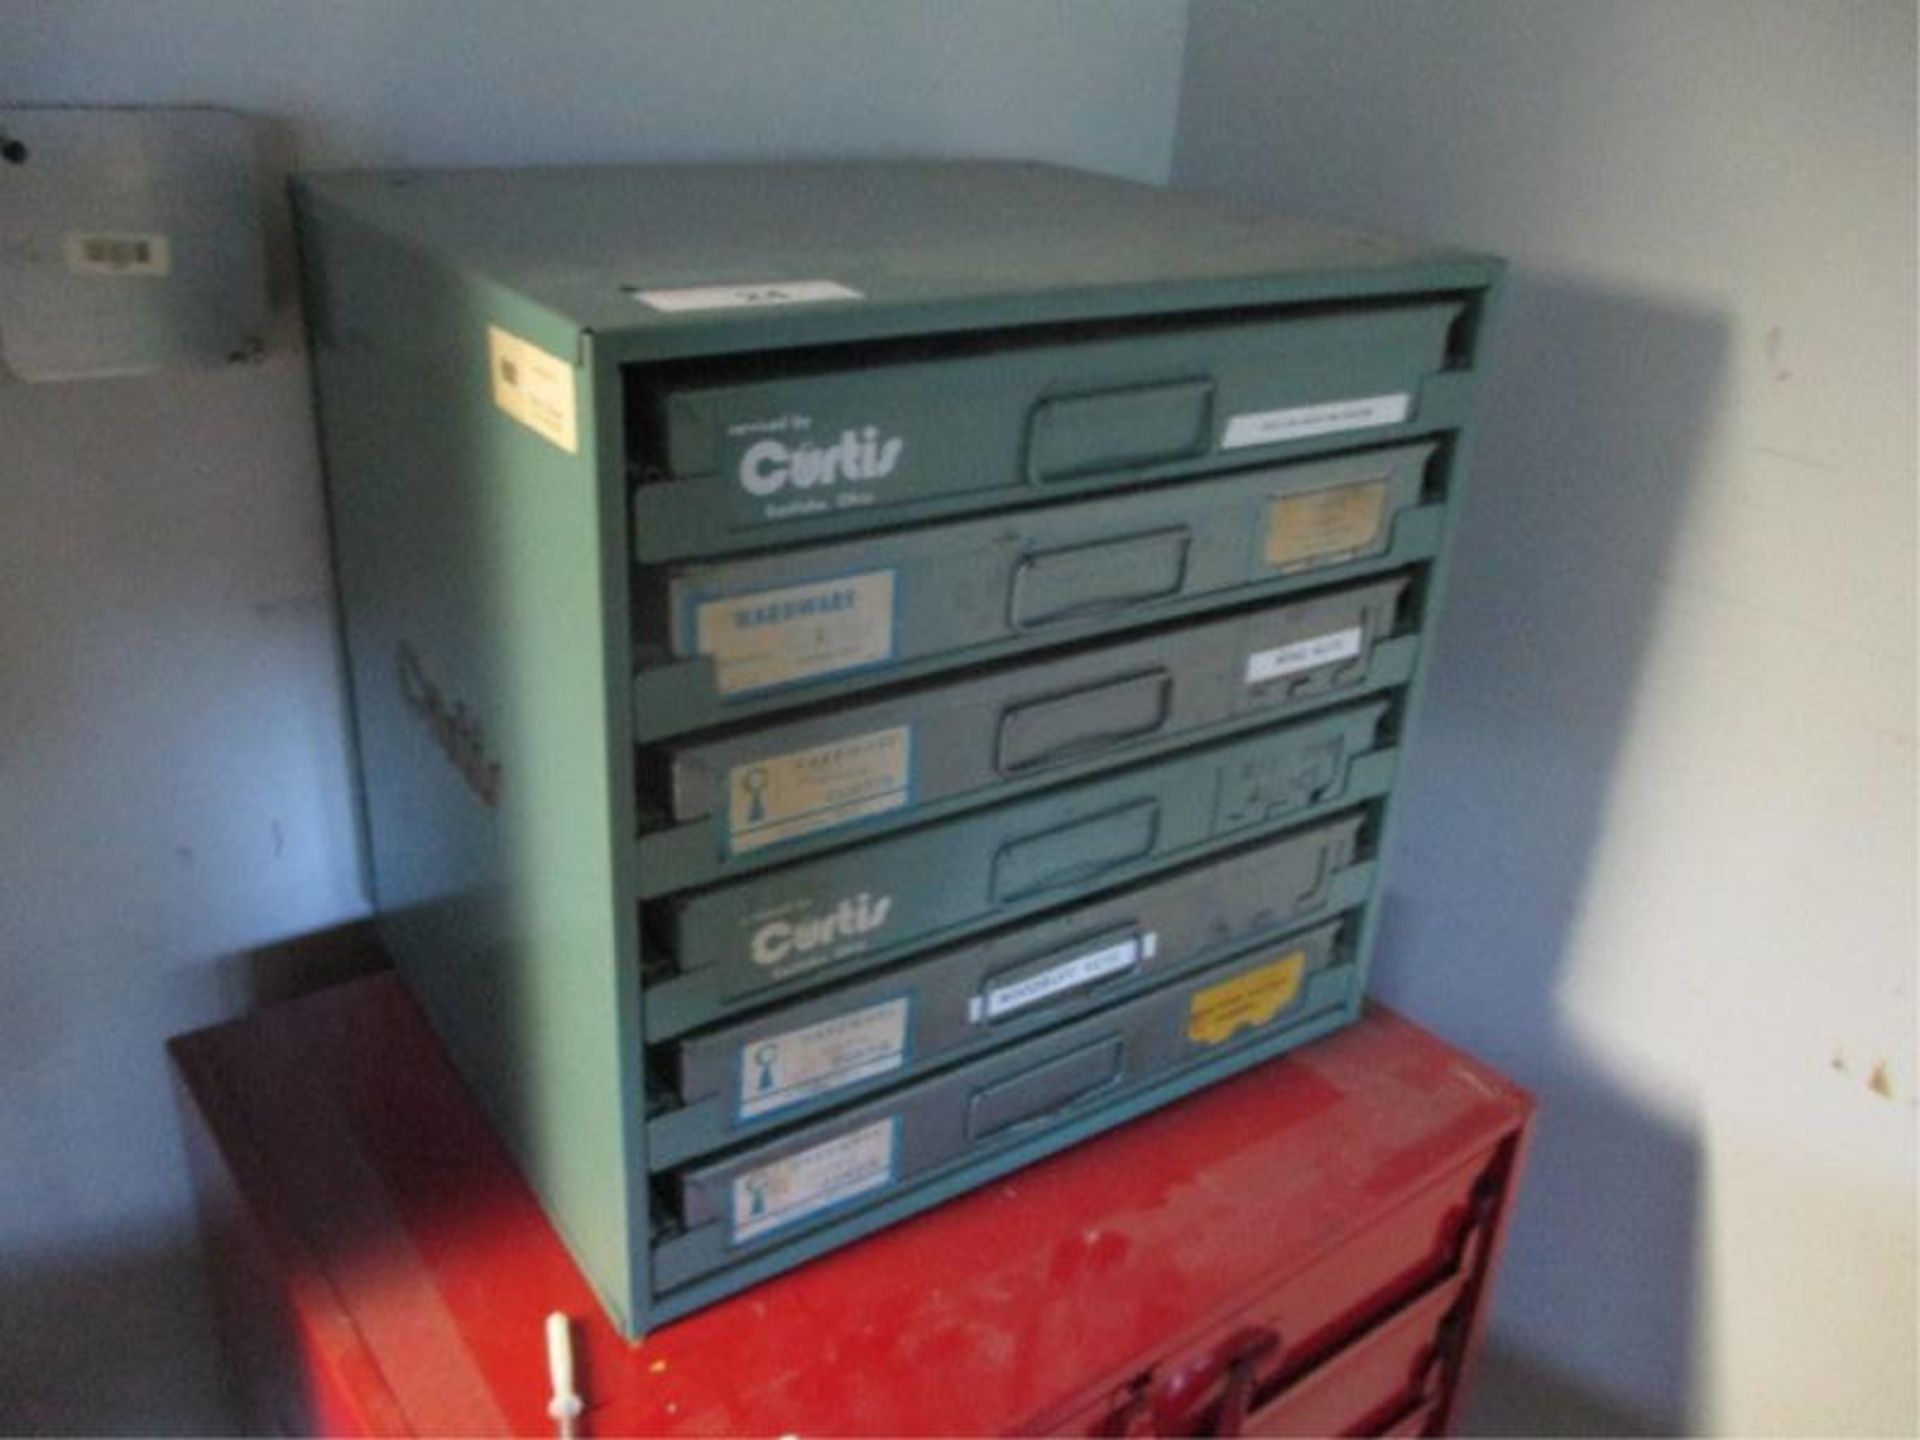 6 Drawer Curtis Hardware Cabinet w/ Nuts, Bolts, Wing Nuts, Woodruff Keys & Grease Fittings